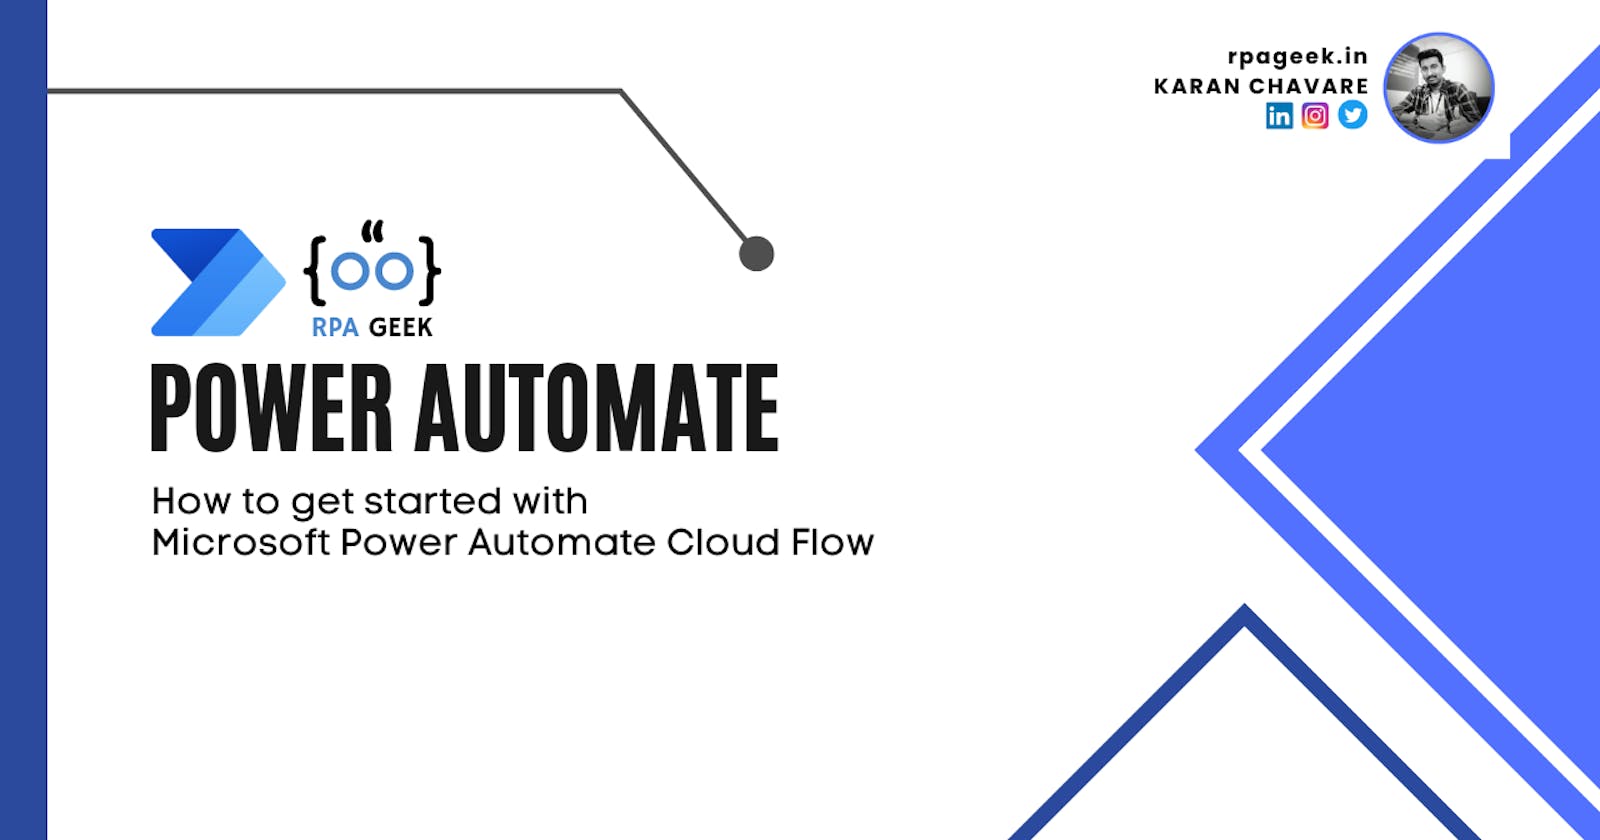 How to get started with Microsoft Power Automate Cloud Flow